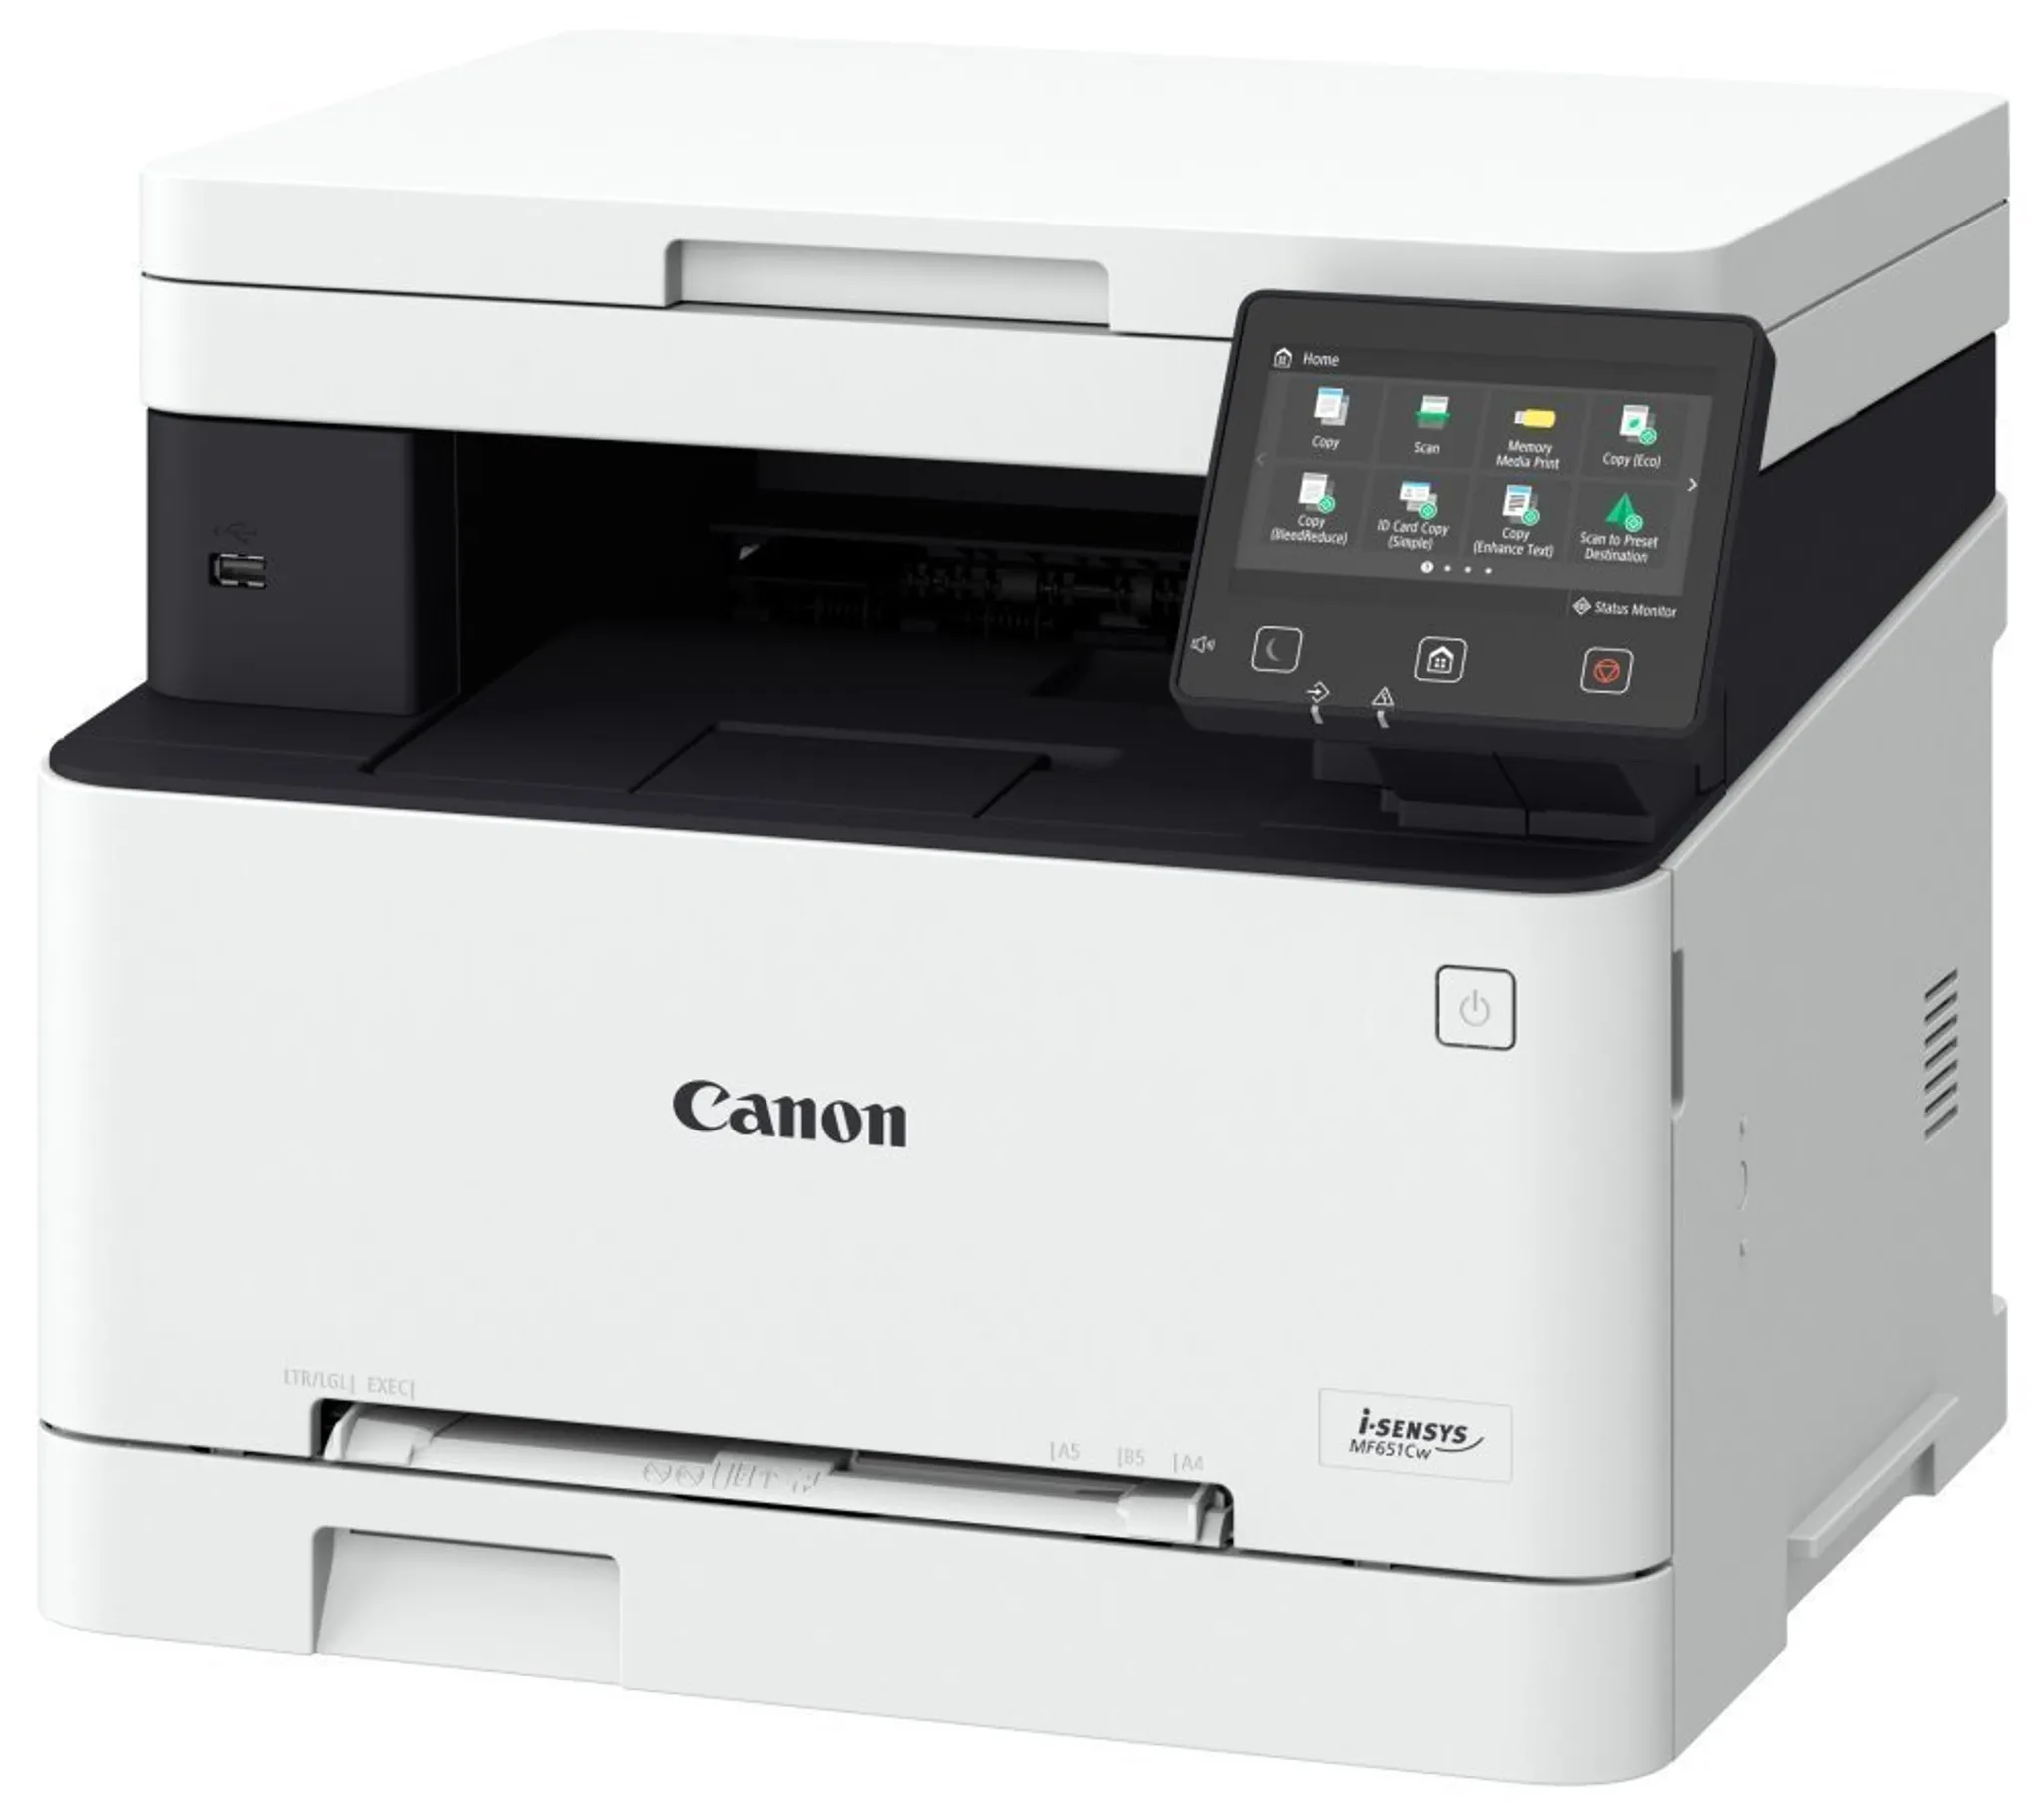 <b>Canon Mf Scan Utility</b>0″ loading=”lazy” style=”width:100%;text-align:center;” onerror=”this.onerror=null;this.src=’https://tse1.mm.bing.net/th?q=canon+mf+scan+utility0;'” /><small style=